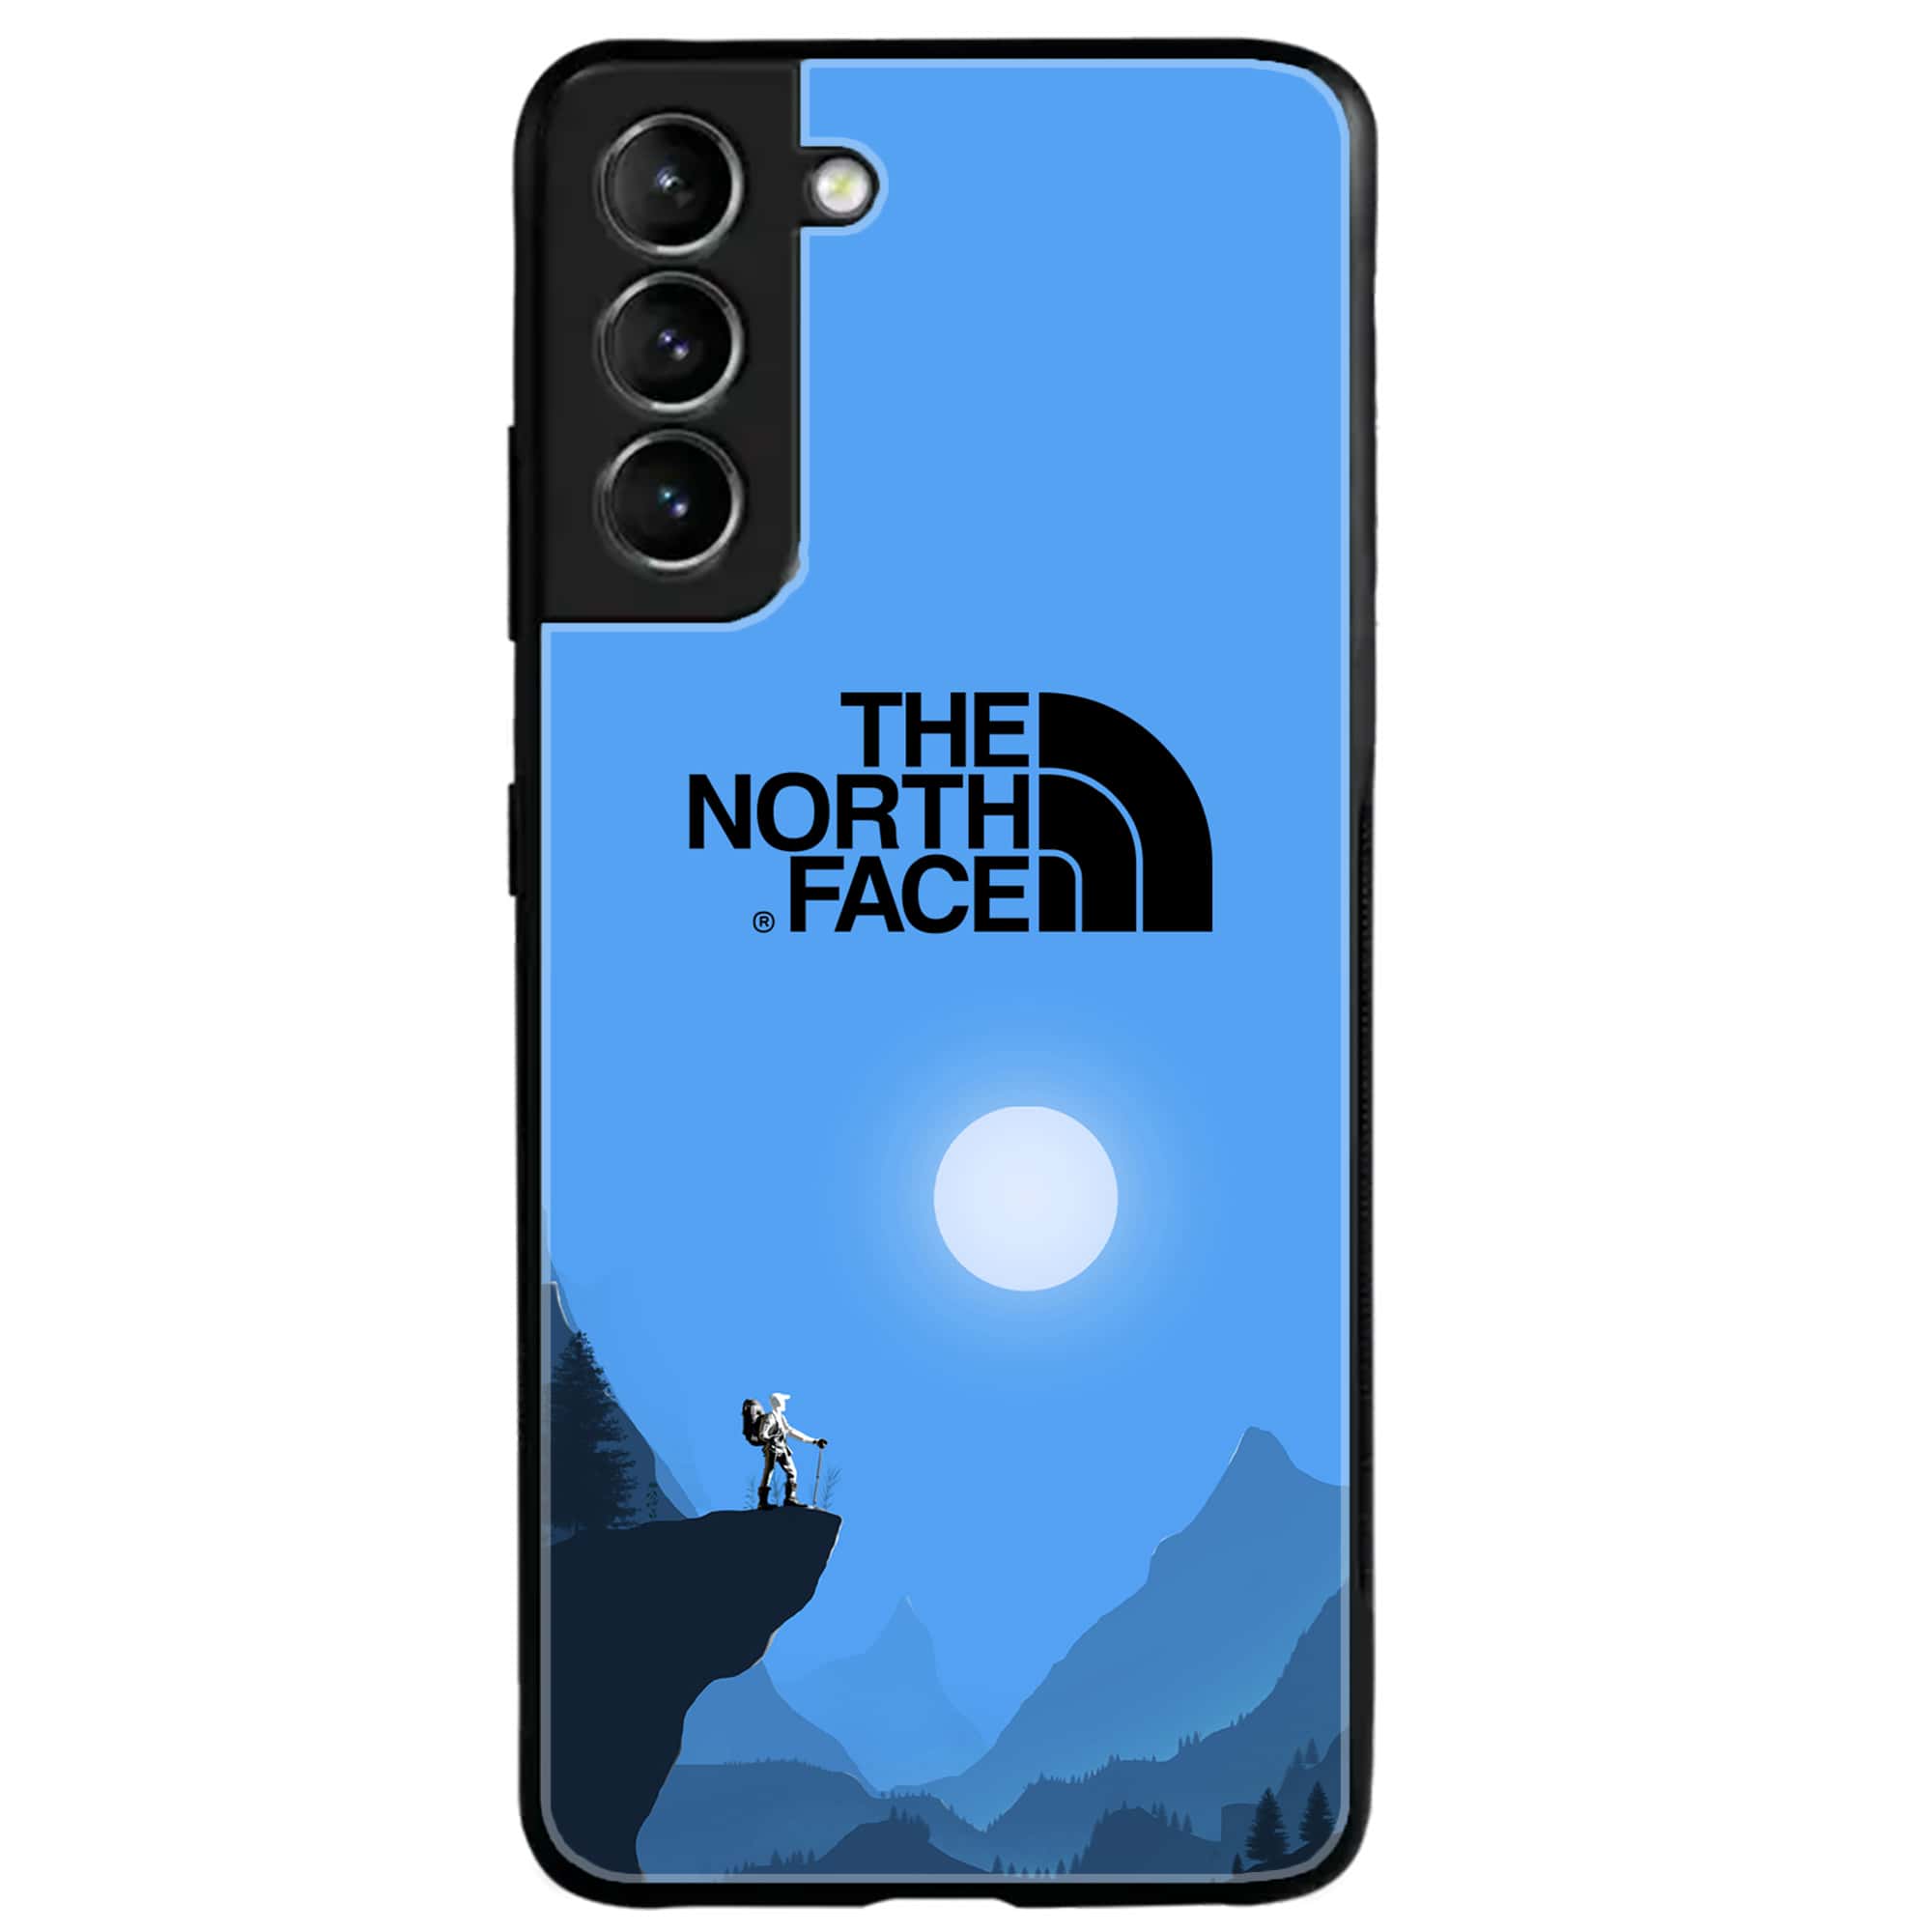 Samsung Galaxy S21 - The North Face Series - Premium Printed Glass soft Bumper shock Proof Case